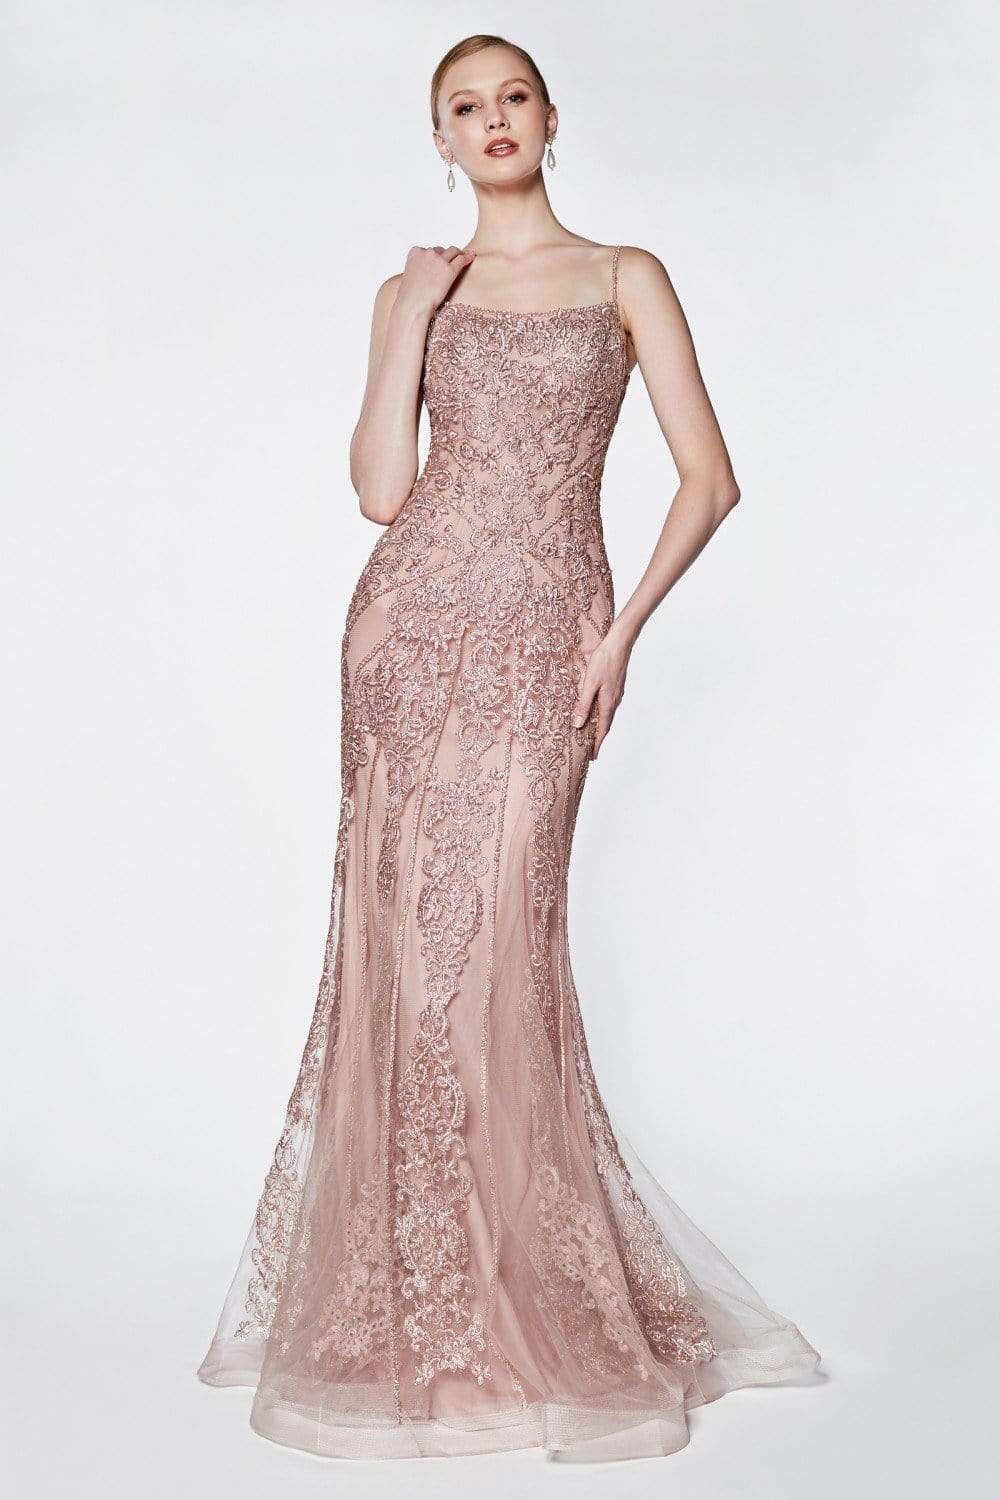 Cinderella Divine - KC885 Sleeveless Sparkly Beaded Lace Mermaid Gown Special Occasion Dress 4 / Rose Gold